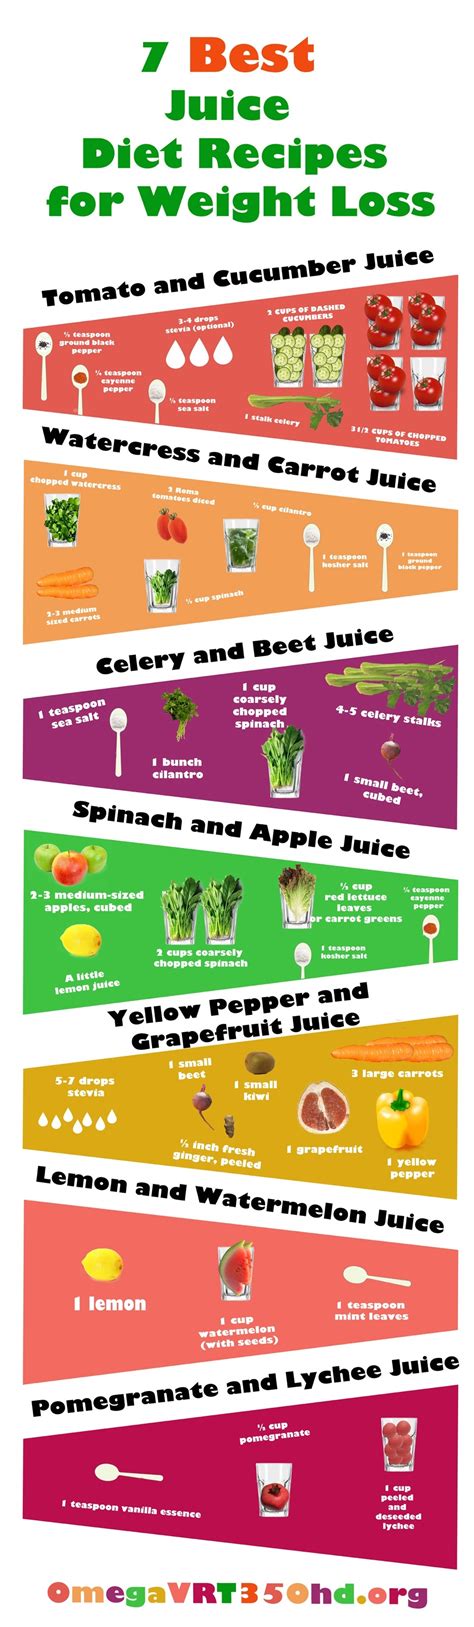 7 Simple Juicing Recipes For Weight Loss Infographic